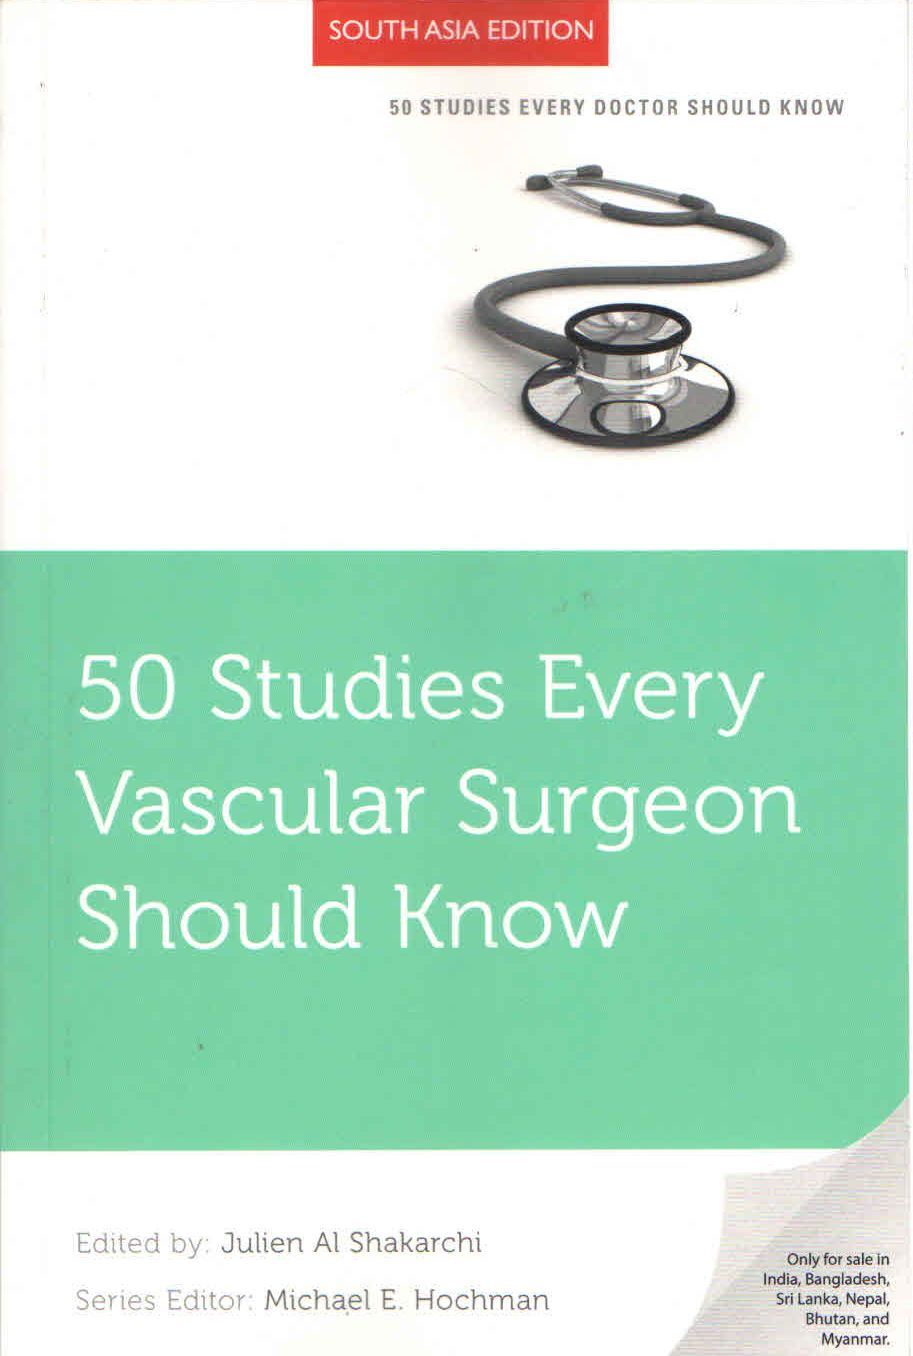 

exclusive-publishers/oxford-university-press/50-studies-every-vascular-surgeon-should-know-9780197777794